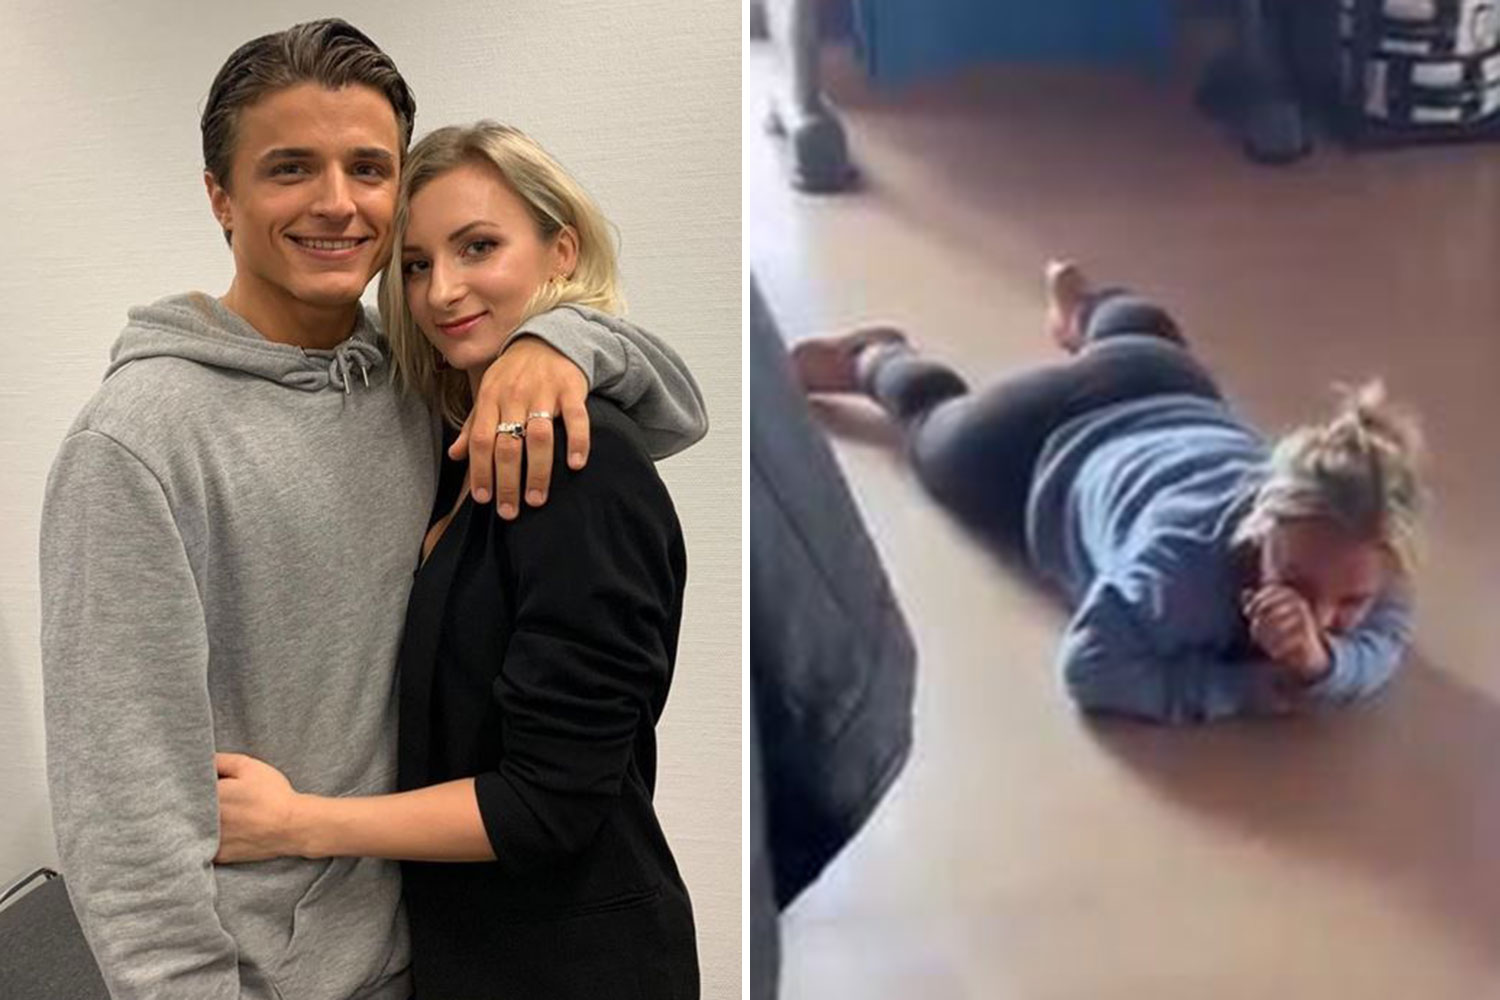 After splitting with her girlfriend, Nikita Kuzmin of Strictly Come Dancing breaks down and speaks out ‘to concentrate on the show’